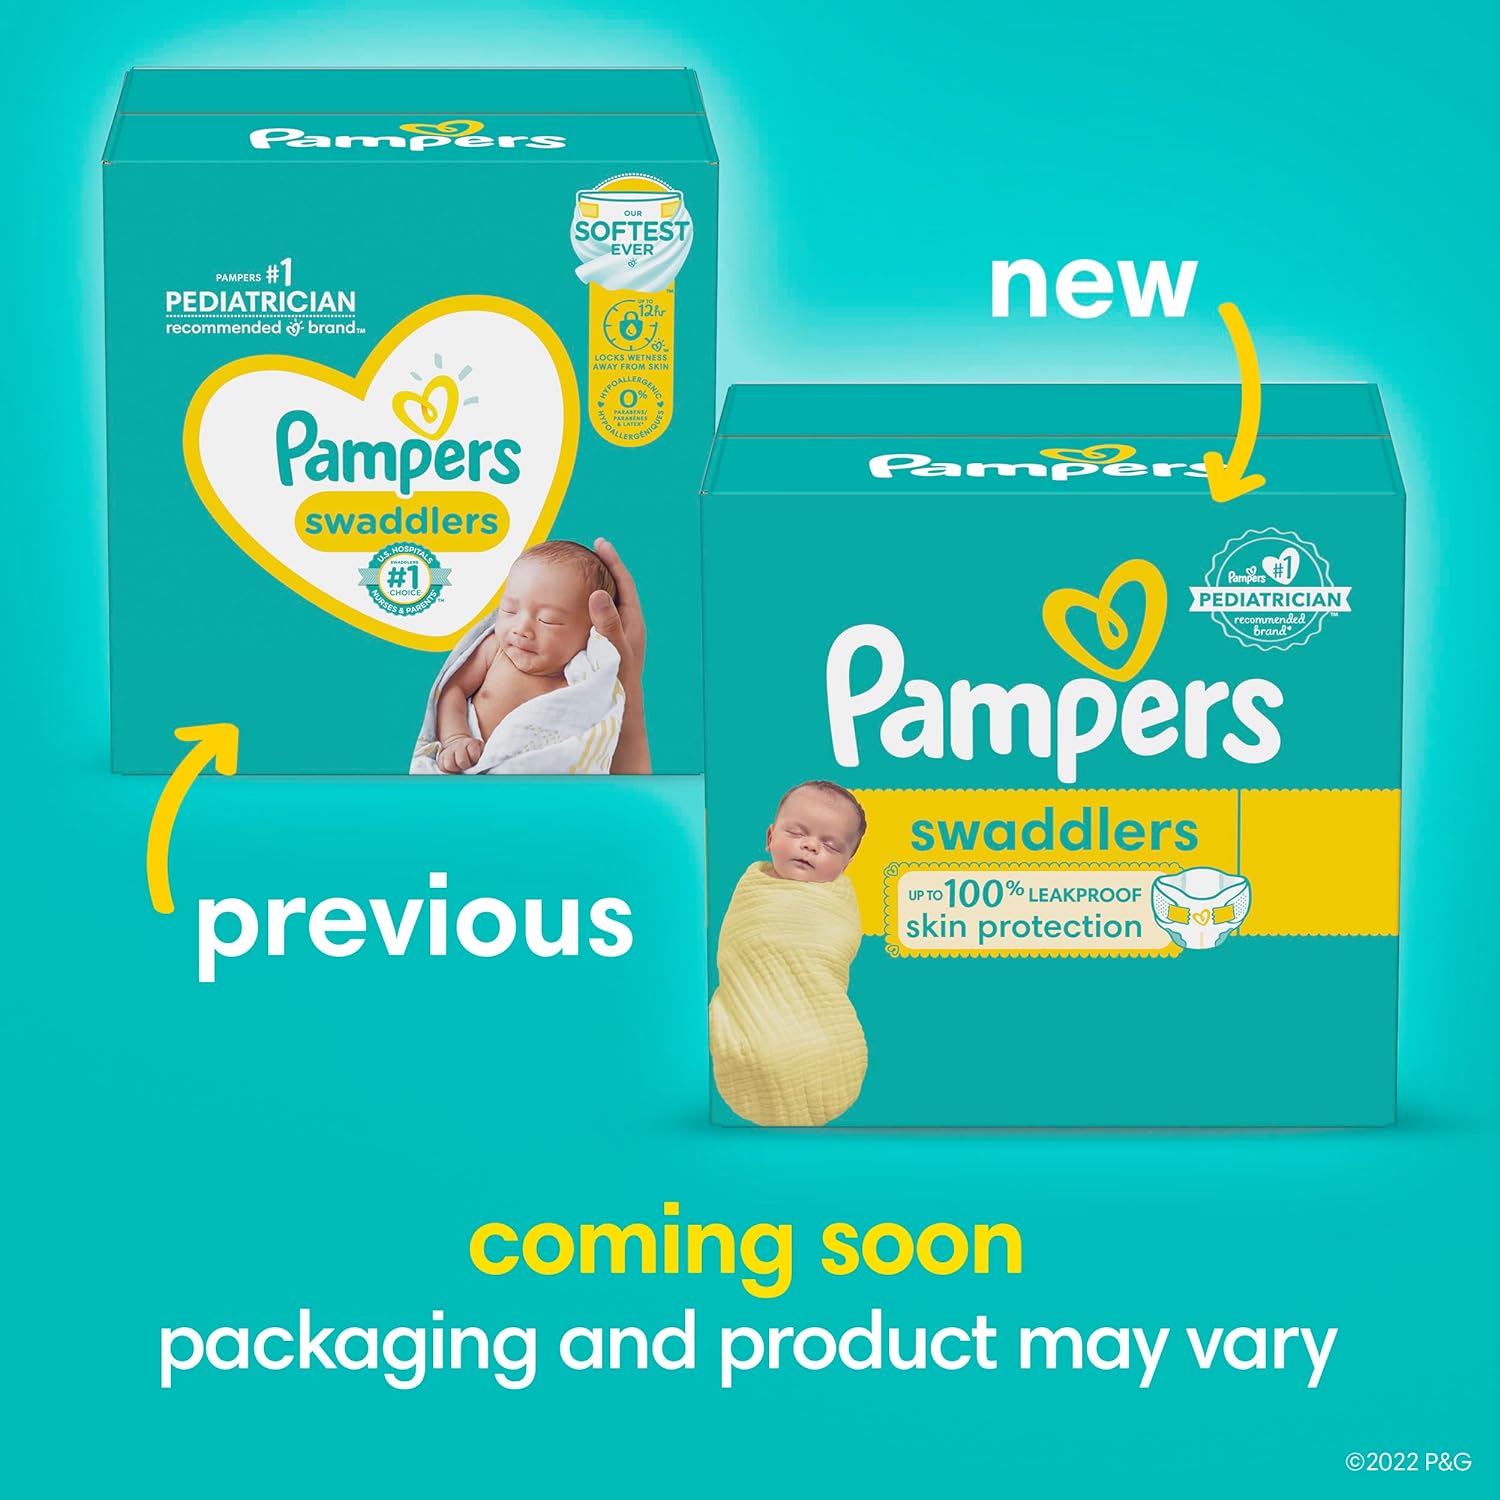 pieluchy pampers active baby mth 4 maxi 174szt